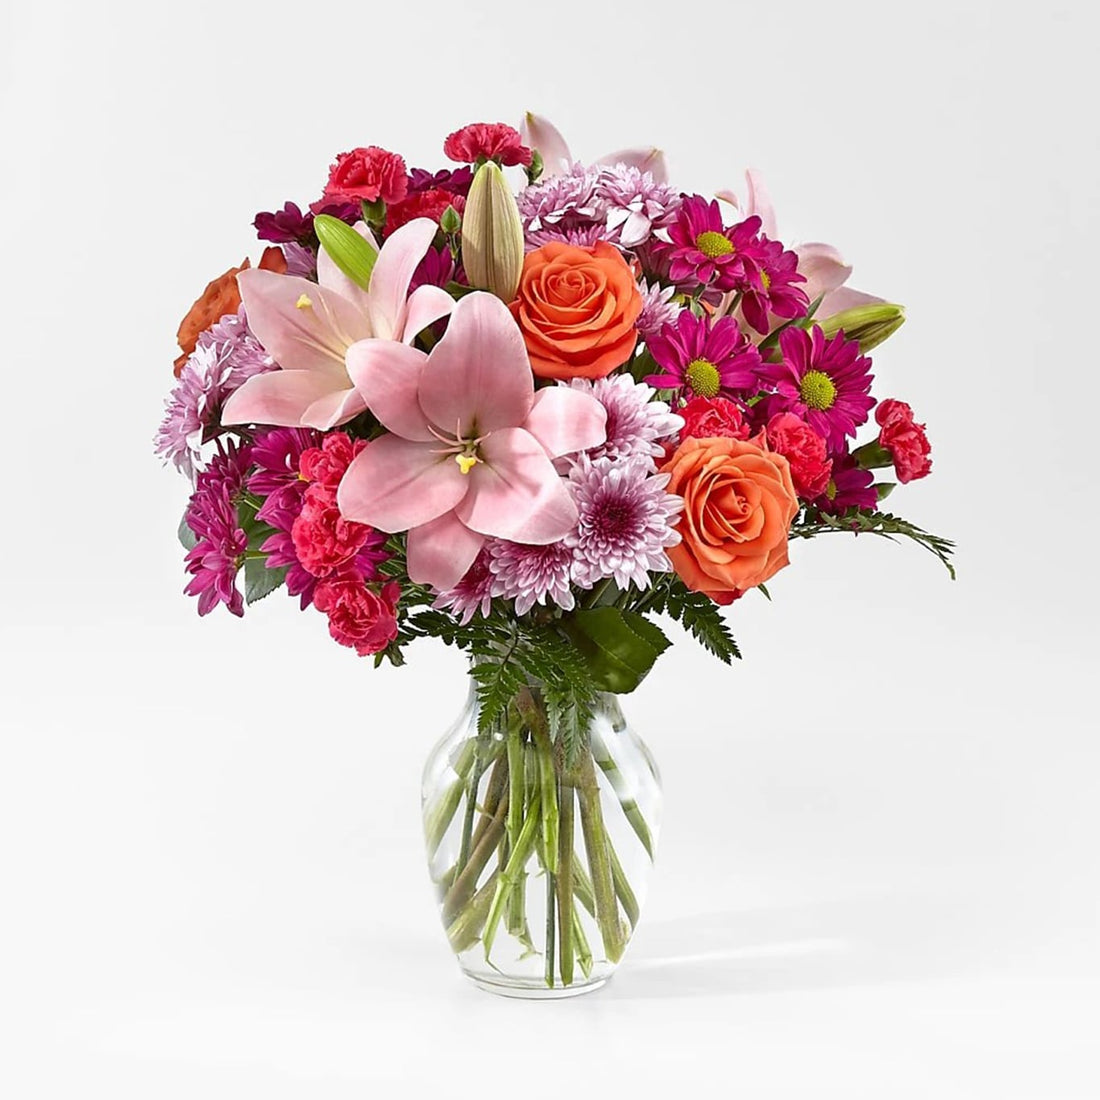 Roses and Lilies Light Of My Life, flower gift with roses, lilies, it is a beautiful gift for anniversary, flower gift for birthday, flowers for all occasions and decoration, Fresh Flowers Orlando.